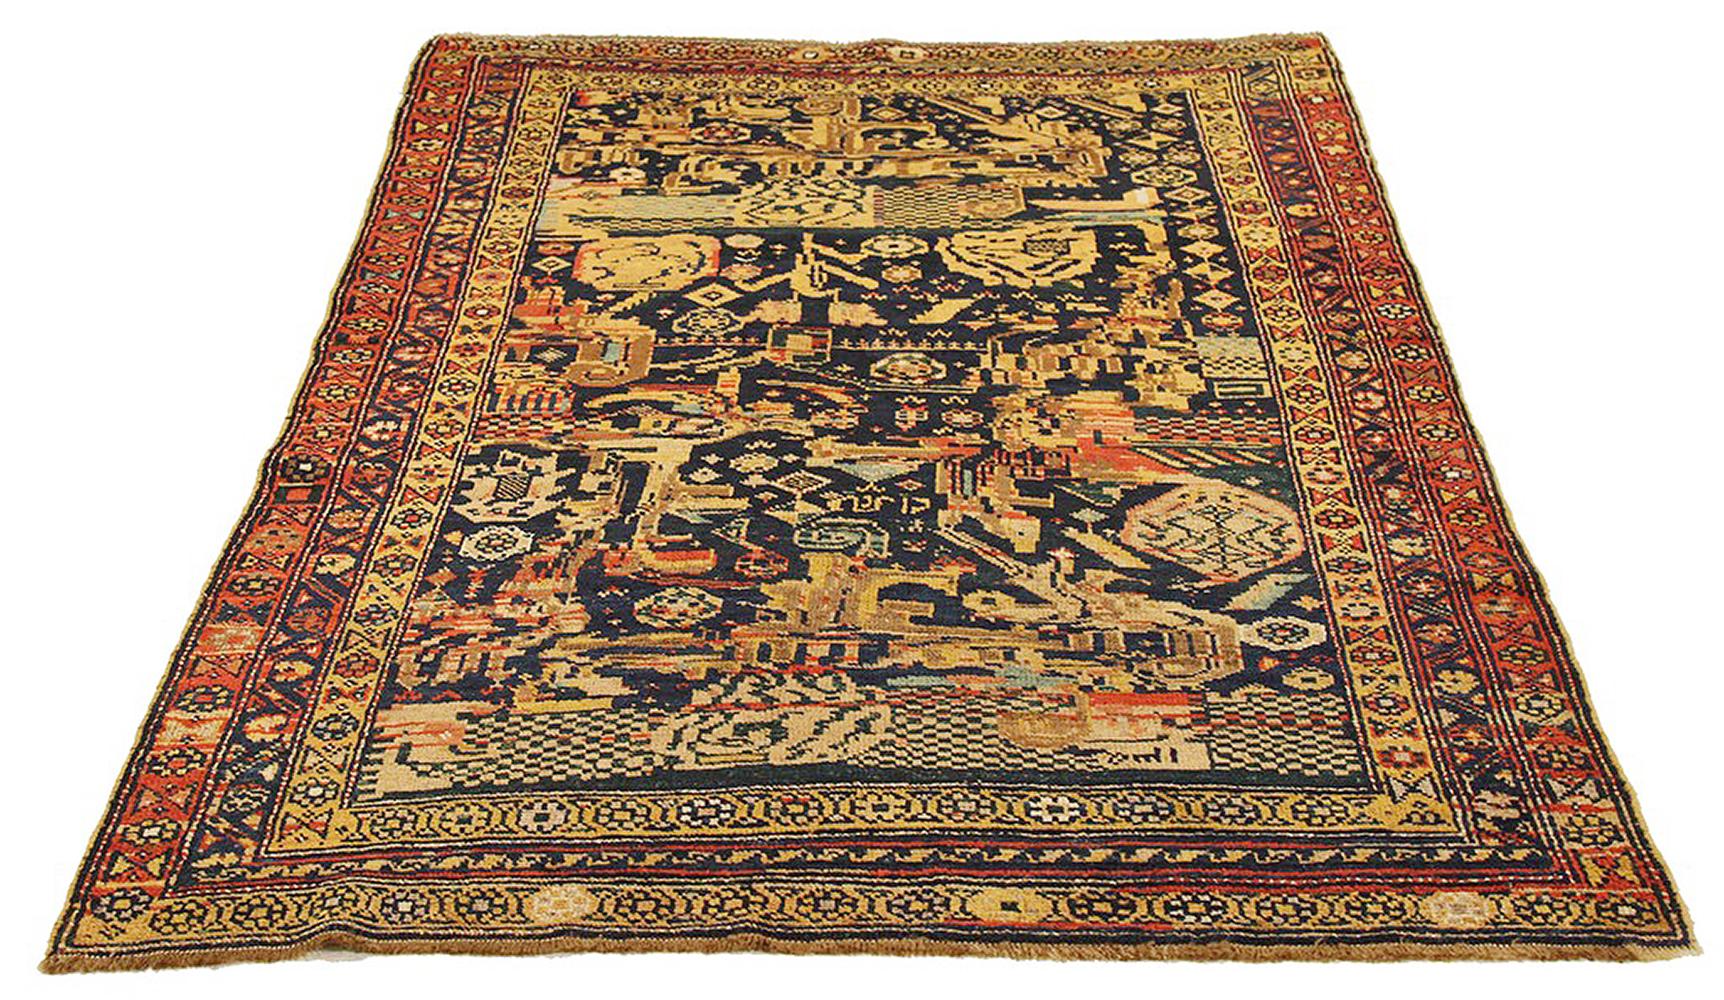 Antique Persian rug handwoven from the finest sheep’s wool and colored with all-natural vegetable dyes that are safe for humans and pets. It’s a traditional Kurdish design highlighted by large and small tribal details in navy, yellow and black. It’s